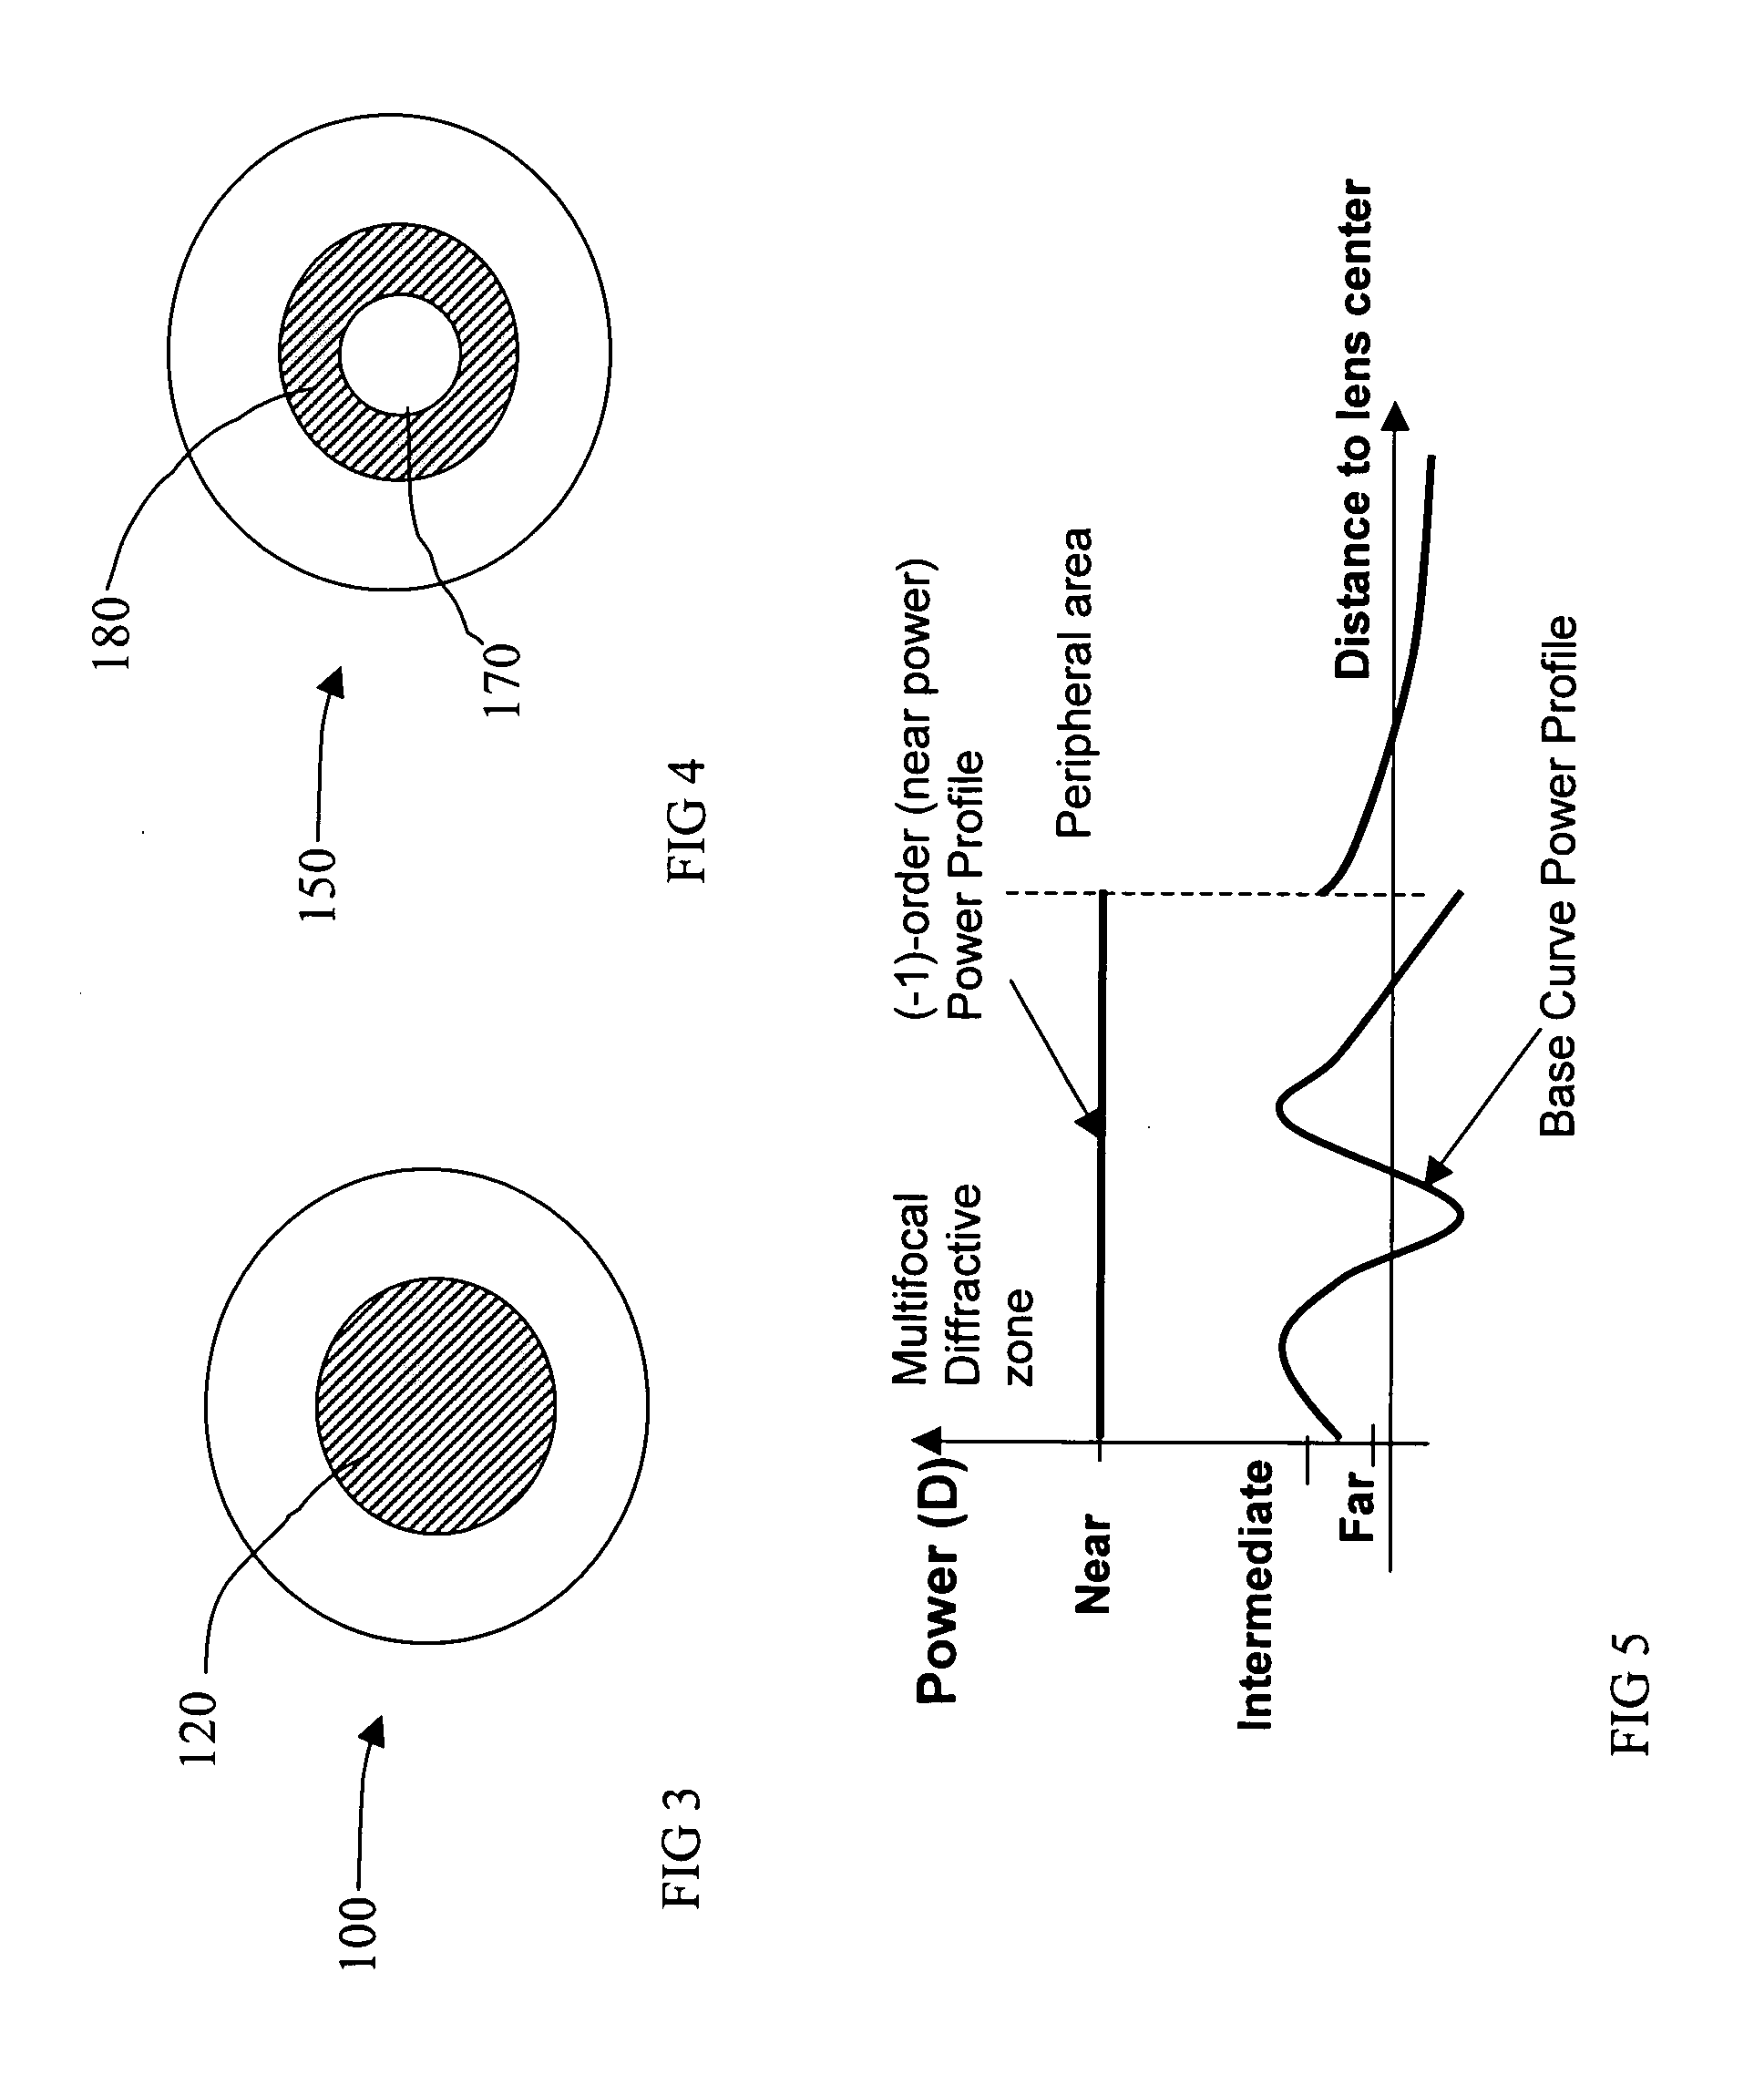 Aspheric multifocal diffractive ophthalmic lens